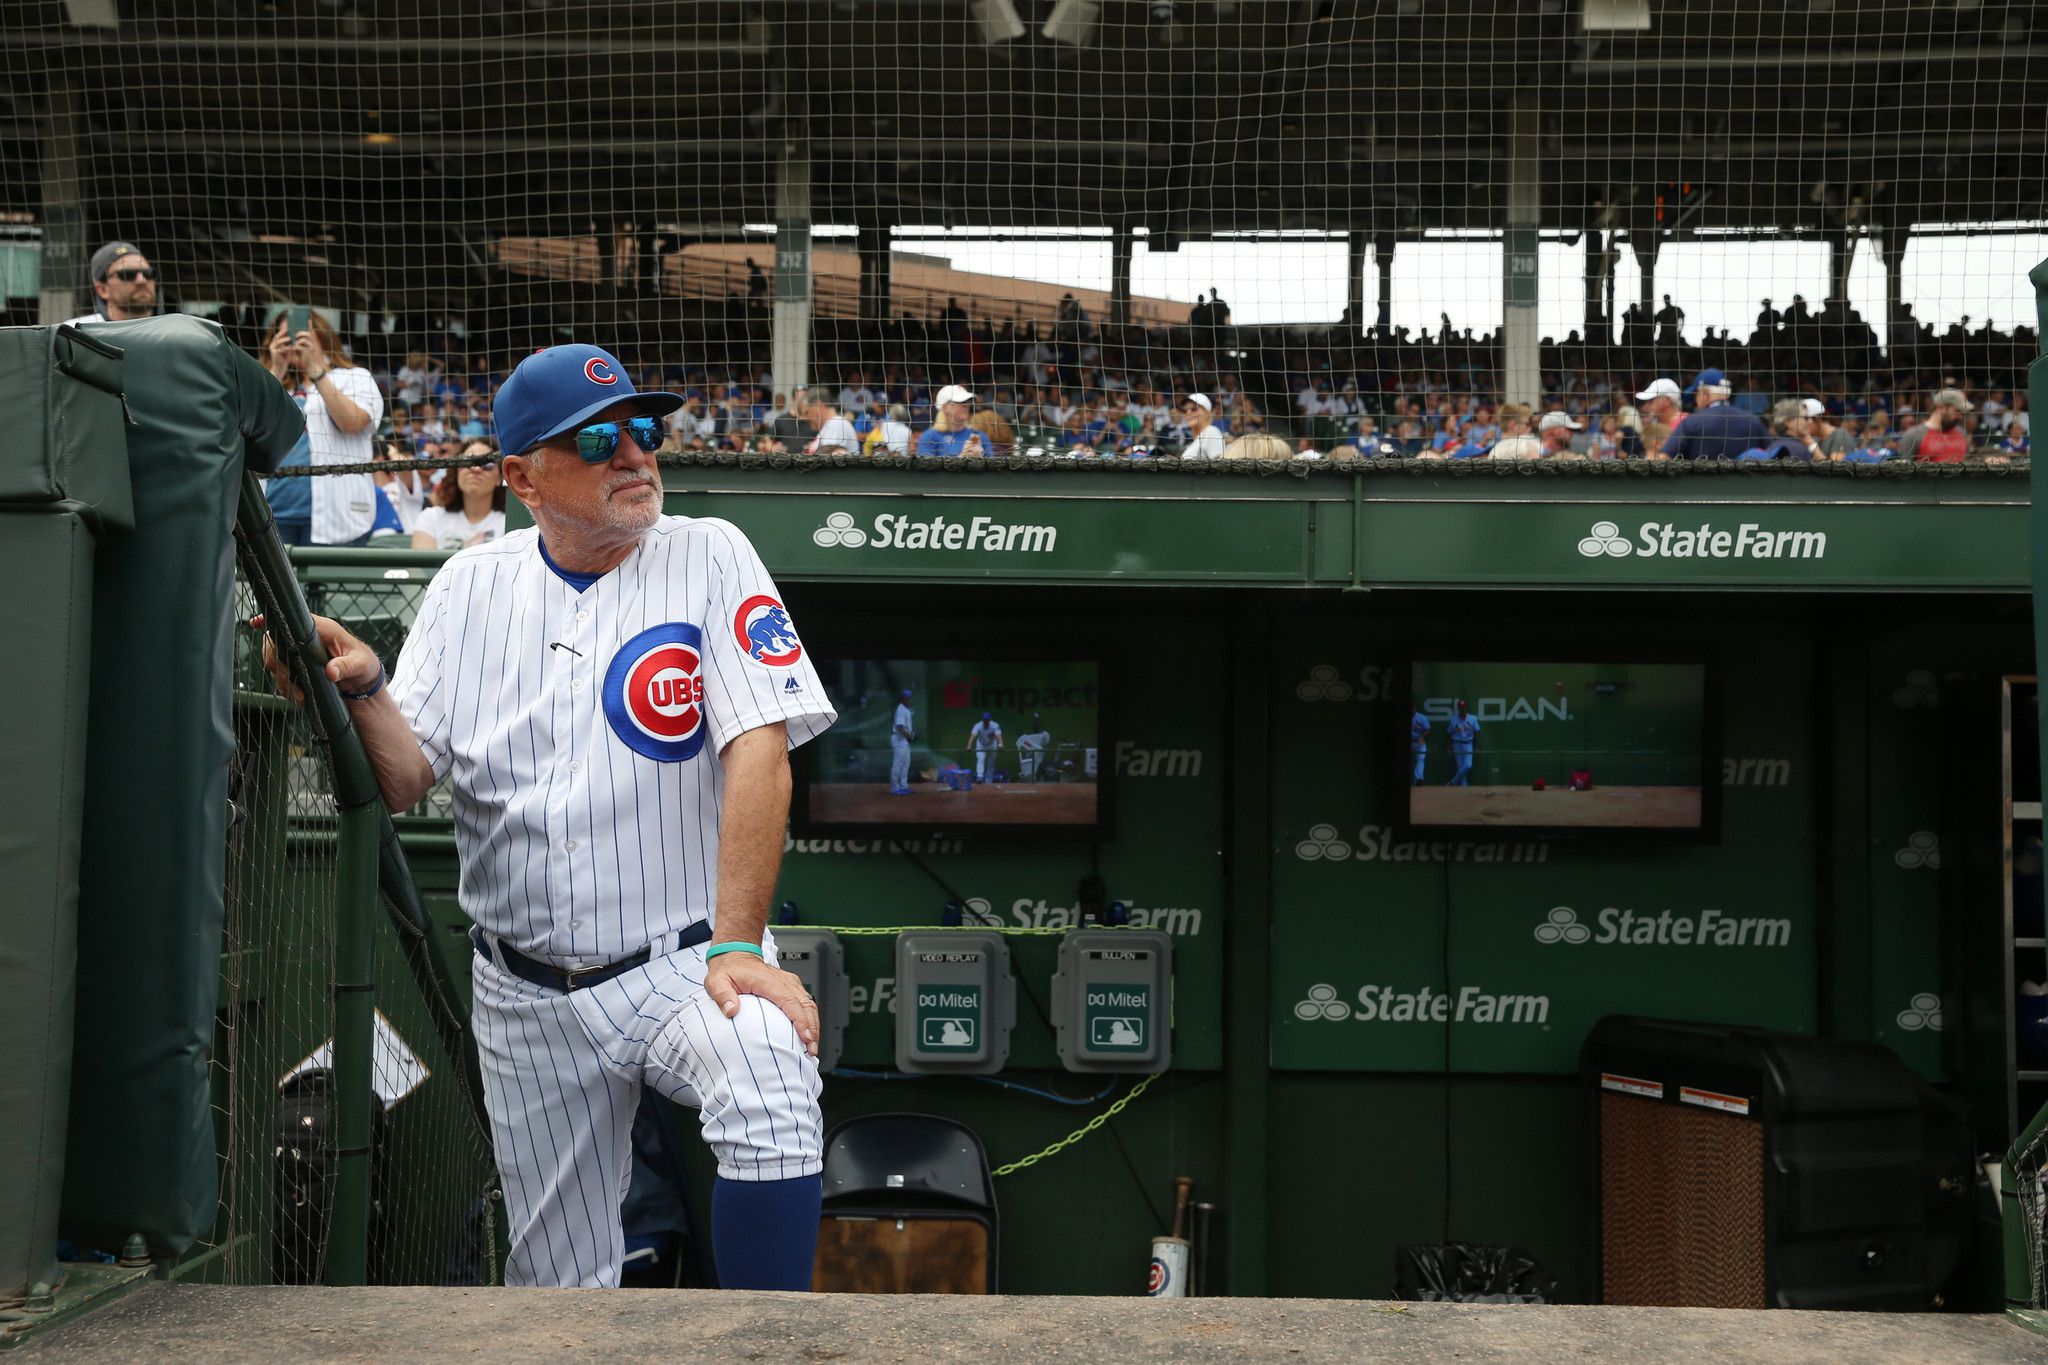 Joe Maddon has Cubs wear short shorts with whistles in his